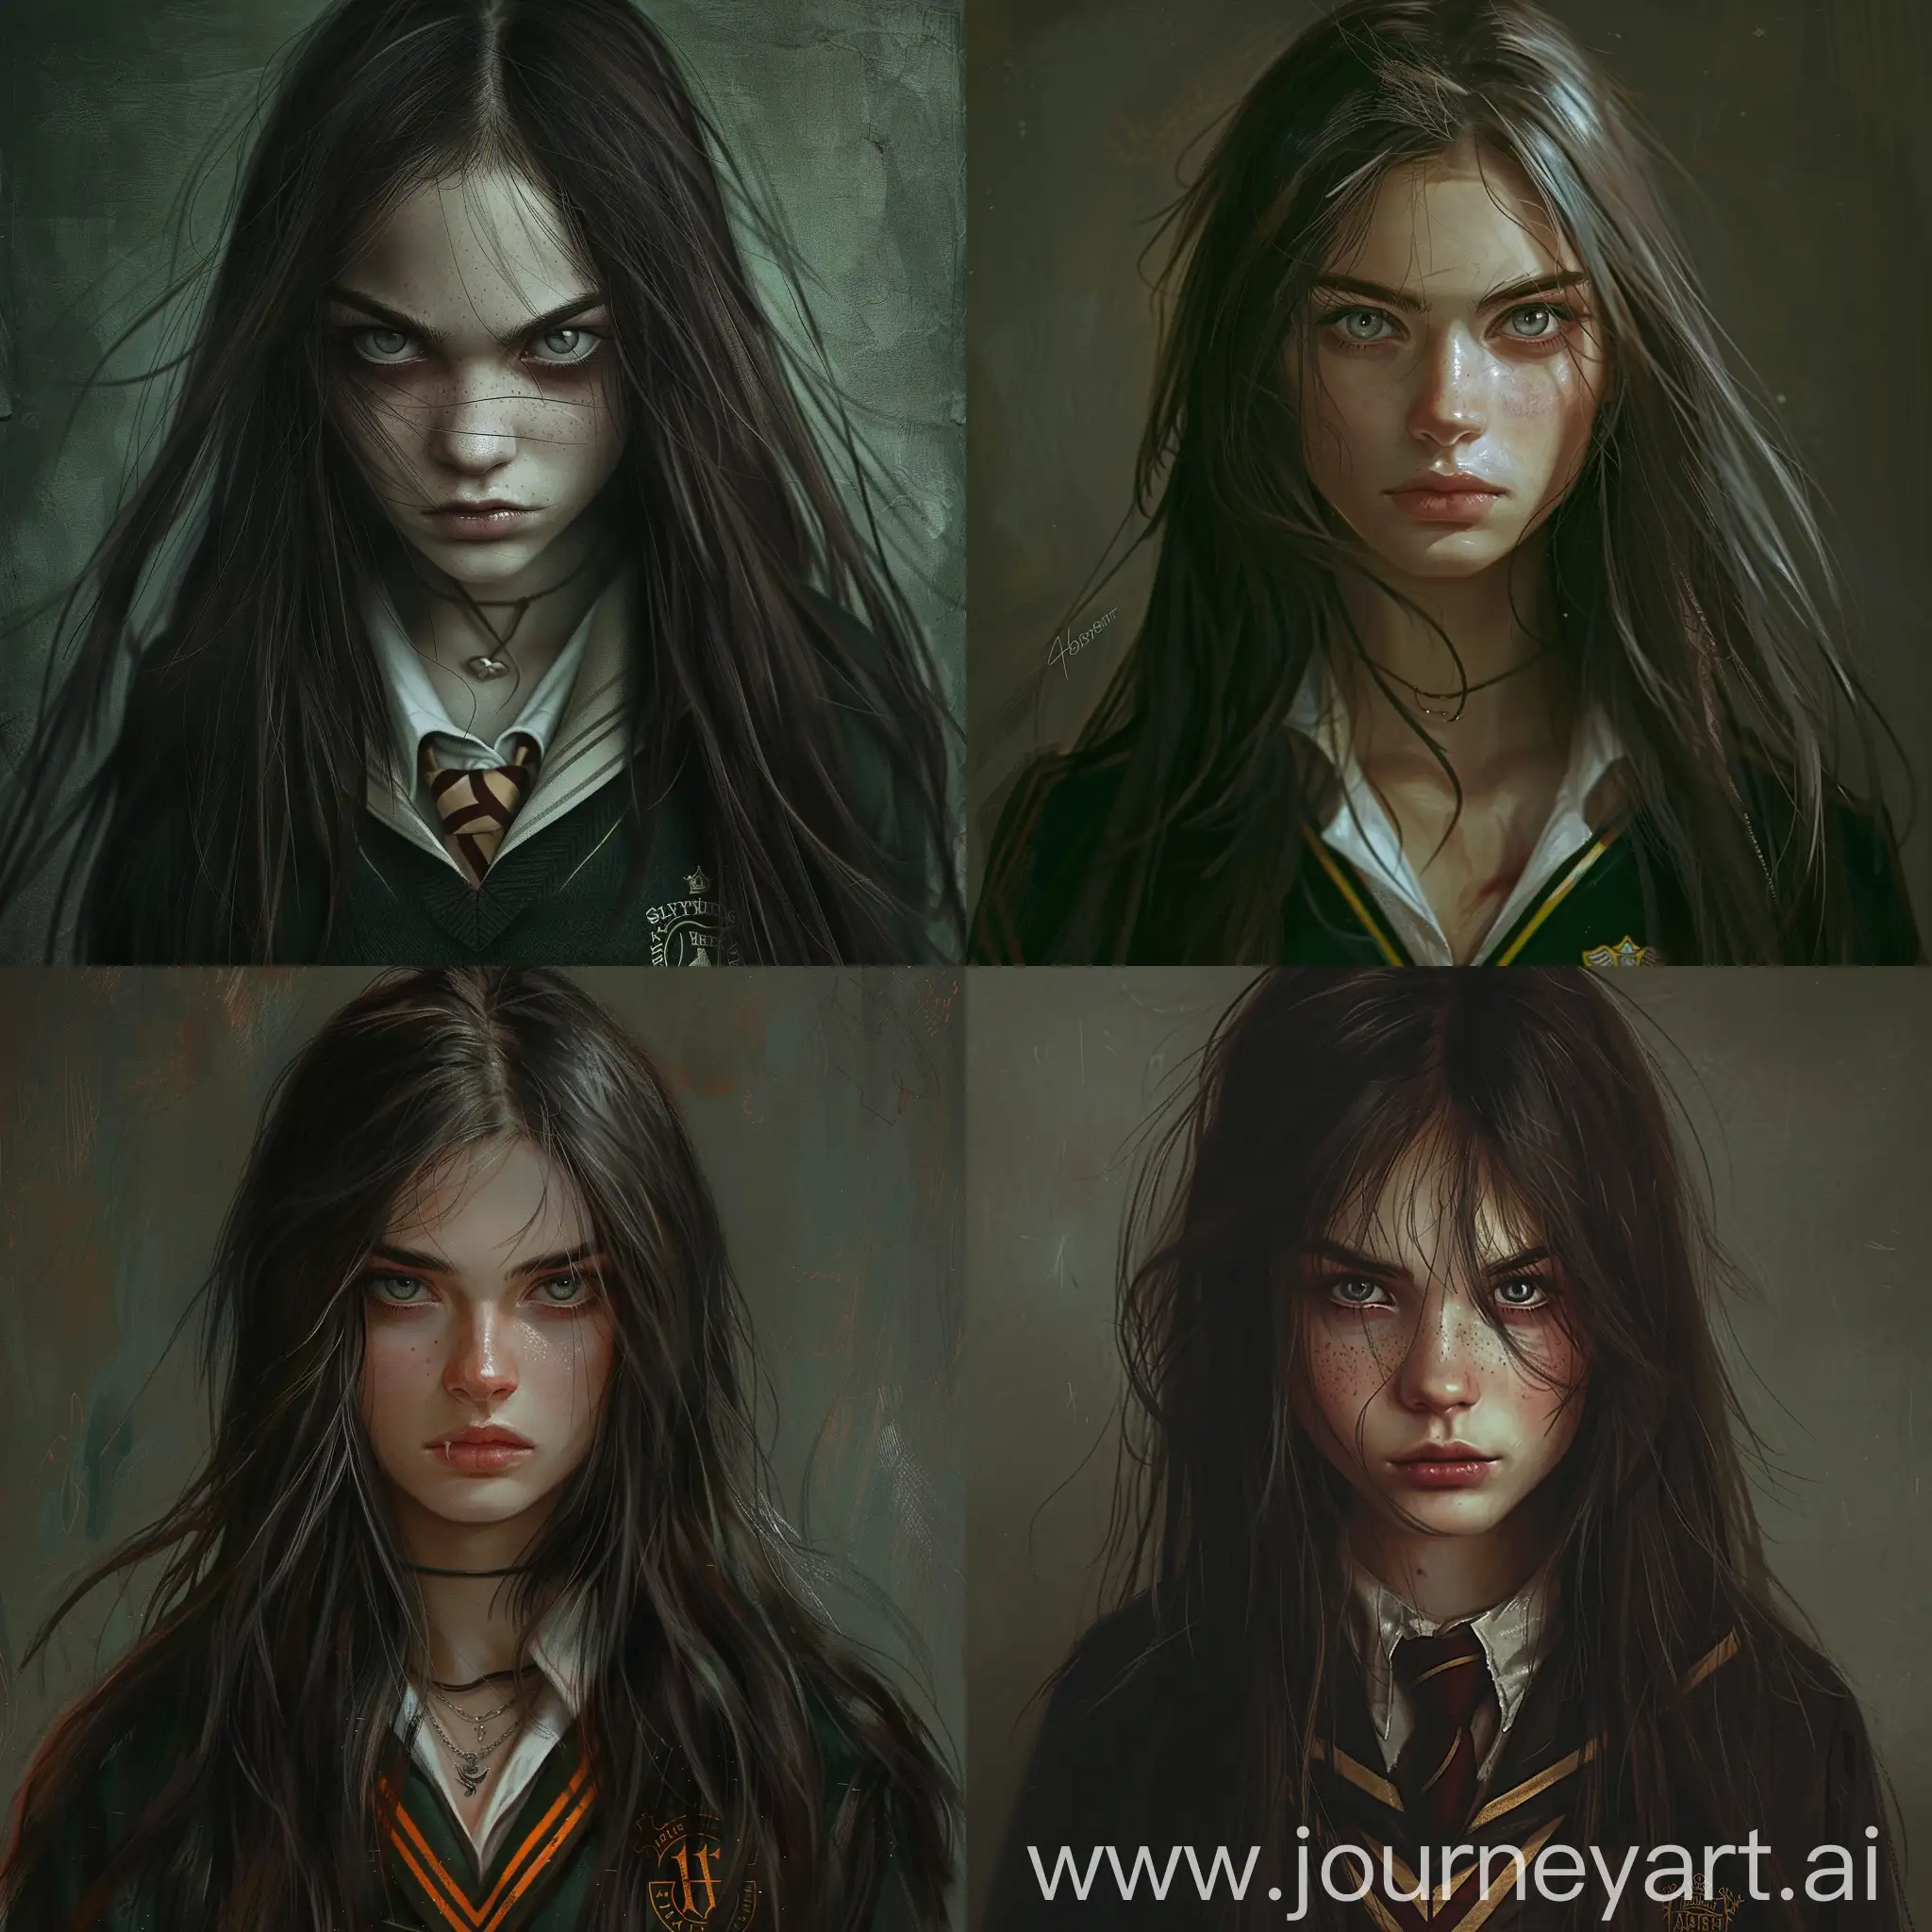 portrait of a moody eighteen-year-old girl with long messy straight dark brown hair in her face with pale skin and piercing gray eyes in a Hogwarts slytherin school uniform.